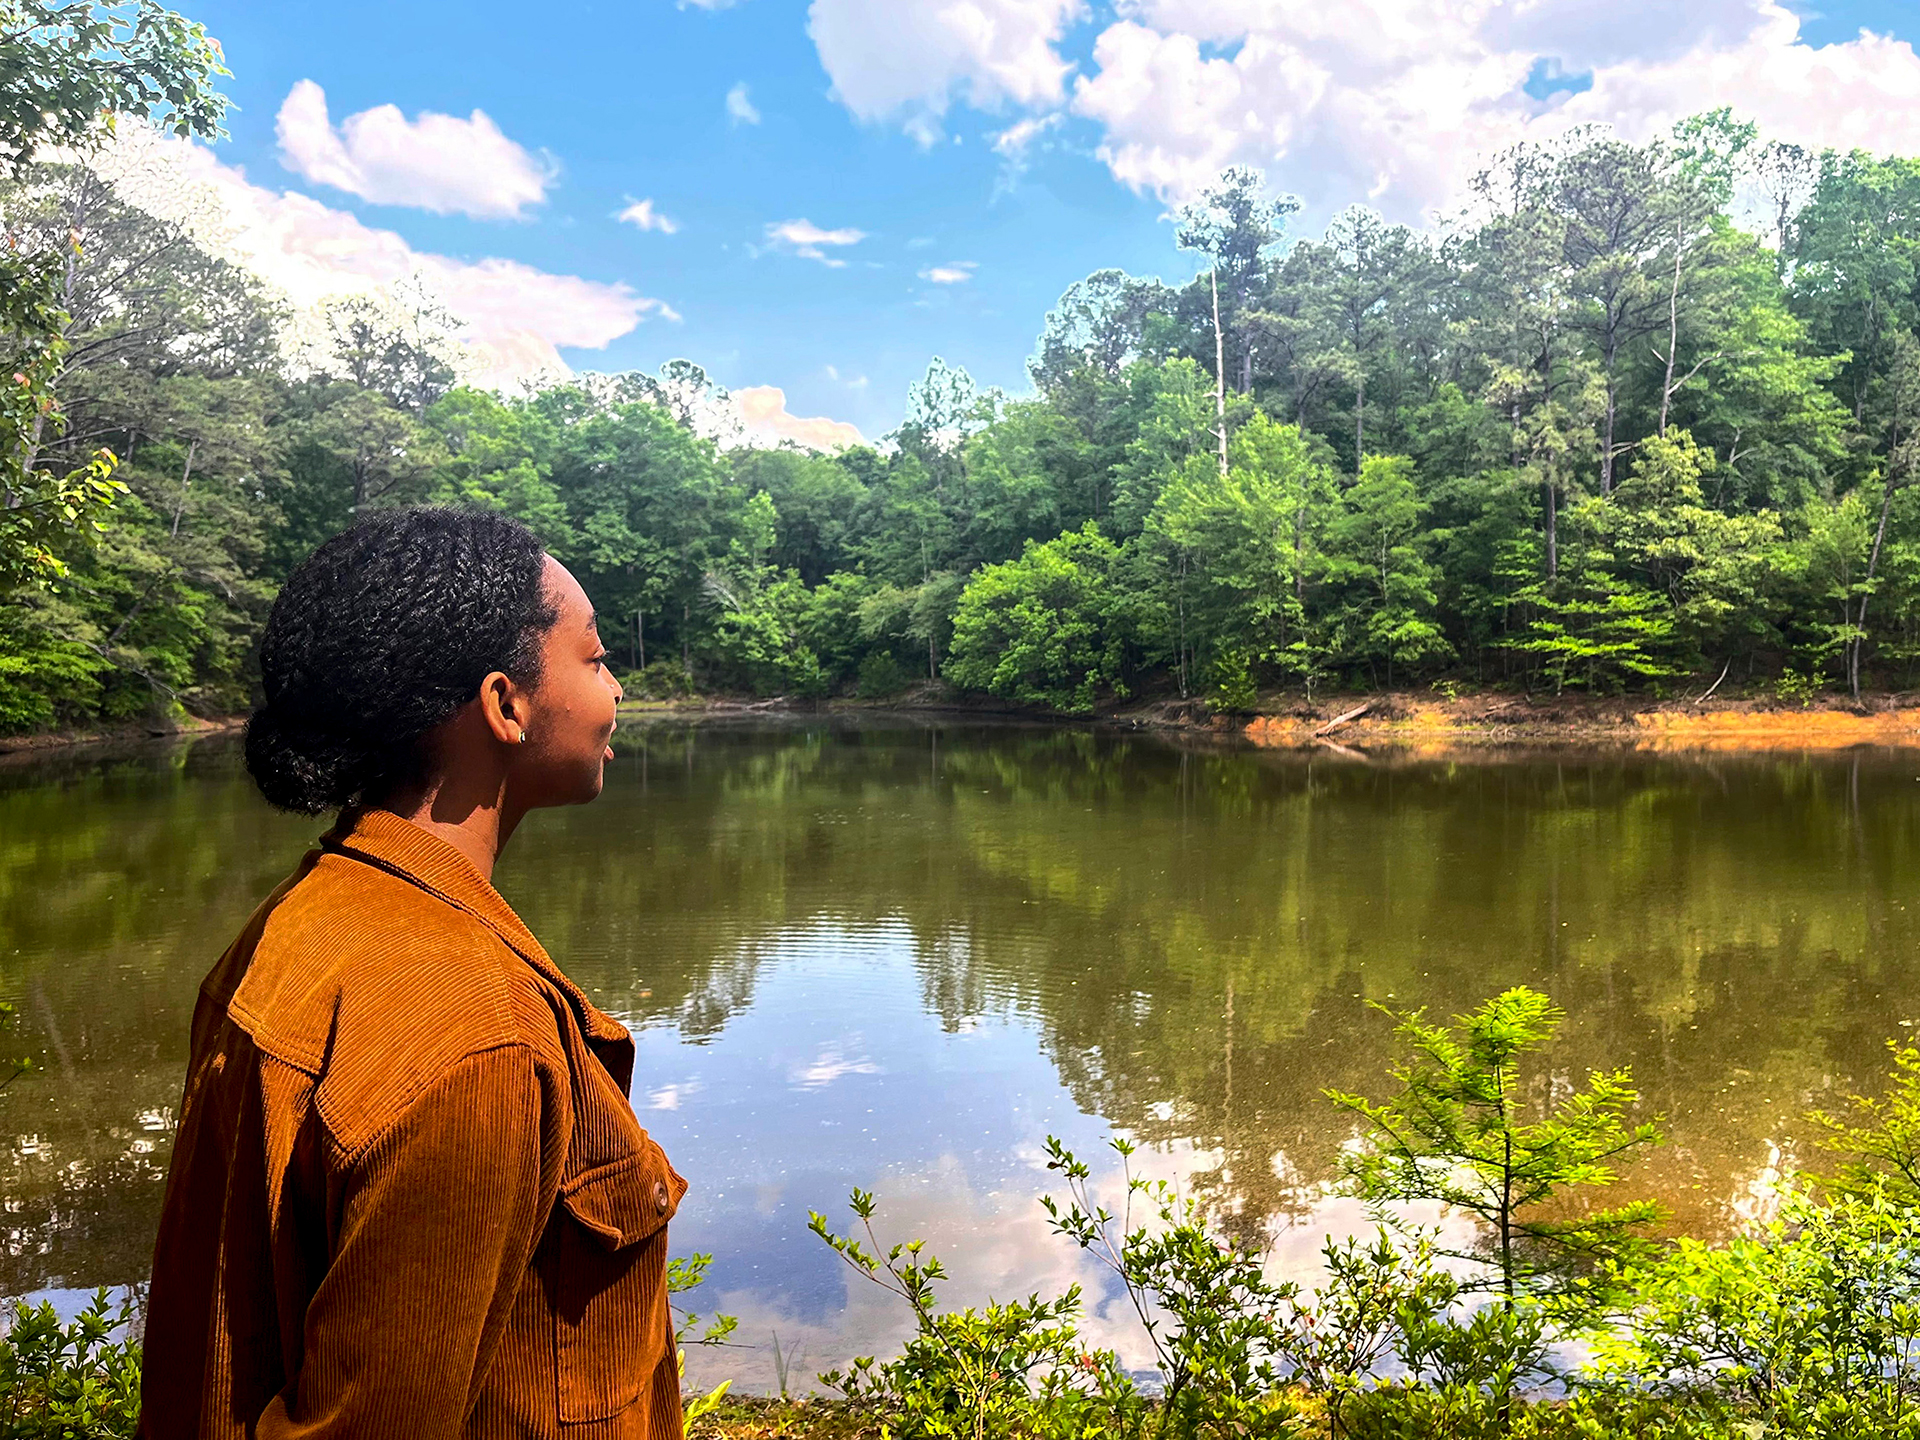 A woman looks across a pond surrounded by trees.